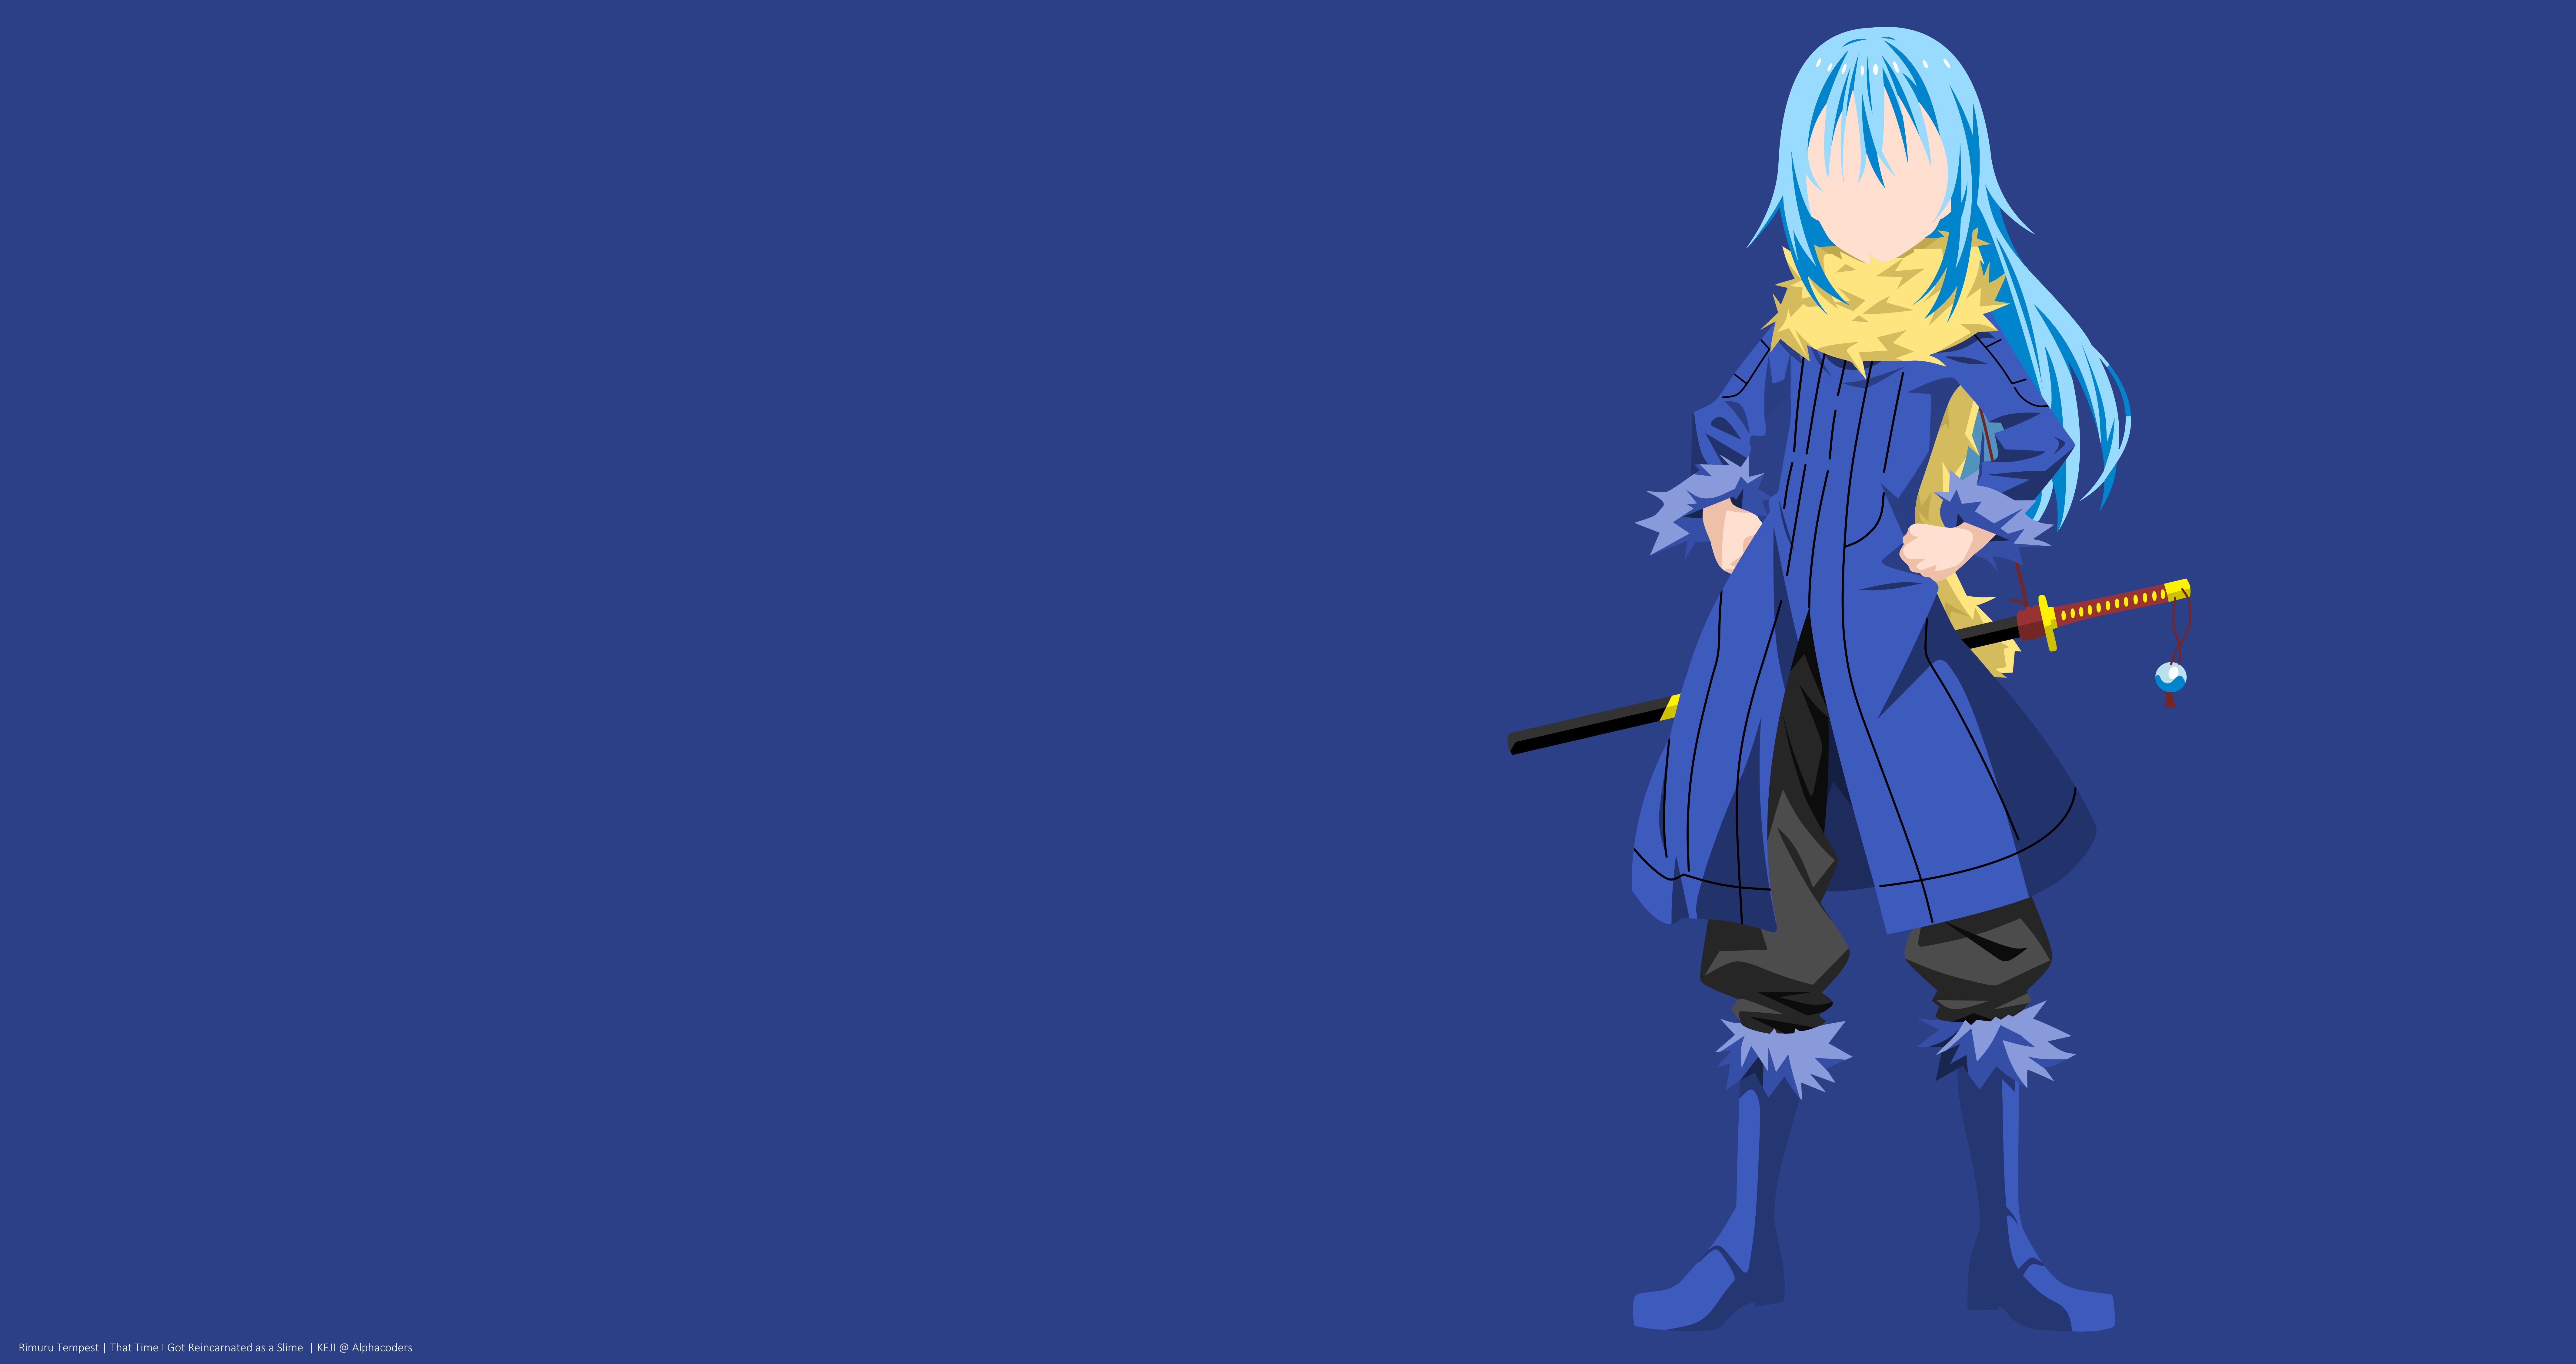 Wallpaper characters, About my reincarnation in slime, That Time I Got  Reincarnated as a Slime, Tensei Shitara Slime Datta Ken for mobile and  desktop, section сёнэн, resolution 1920x1080 - download